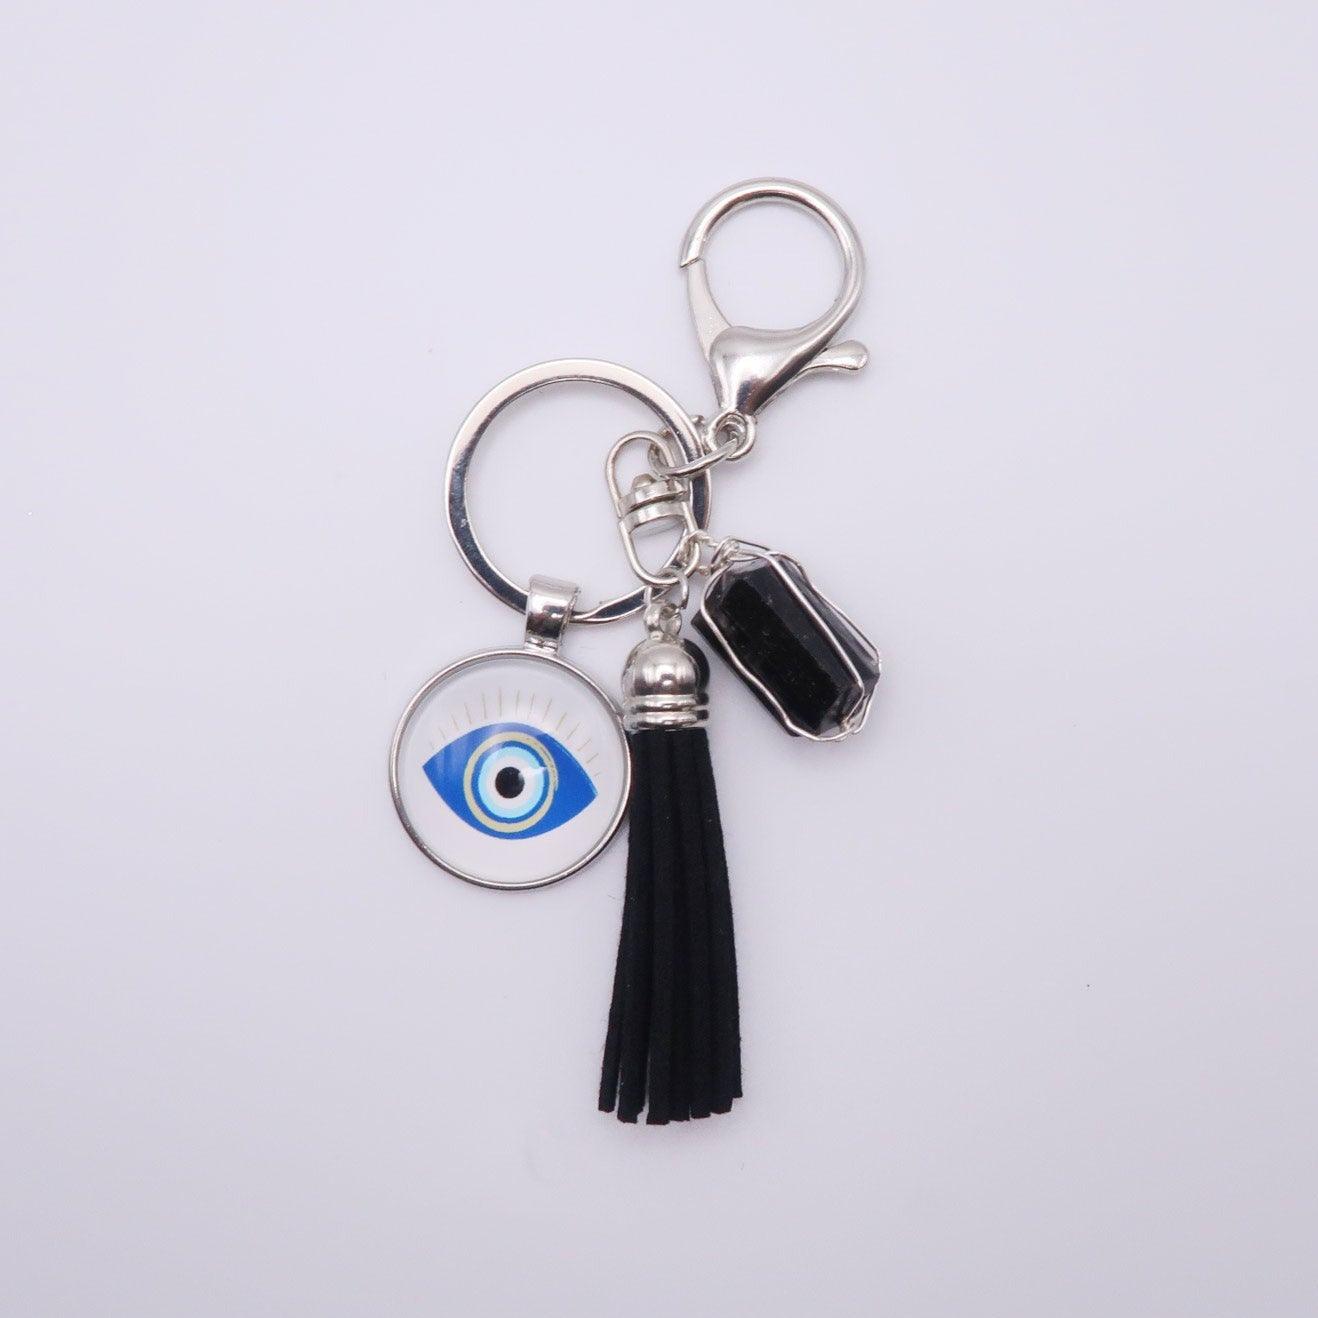 Evil Eye Keychain with Black Tourmaline for Energy Protection against Haters.